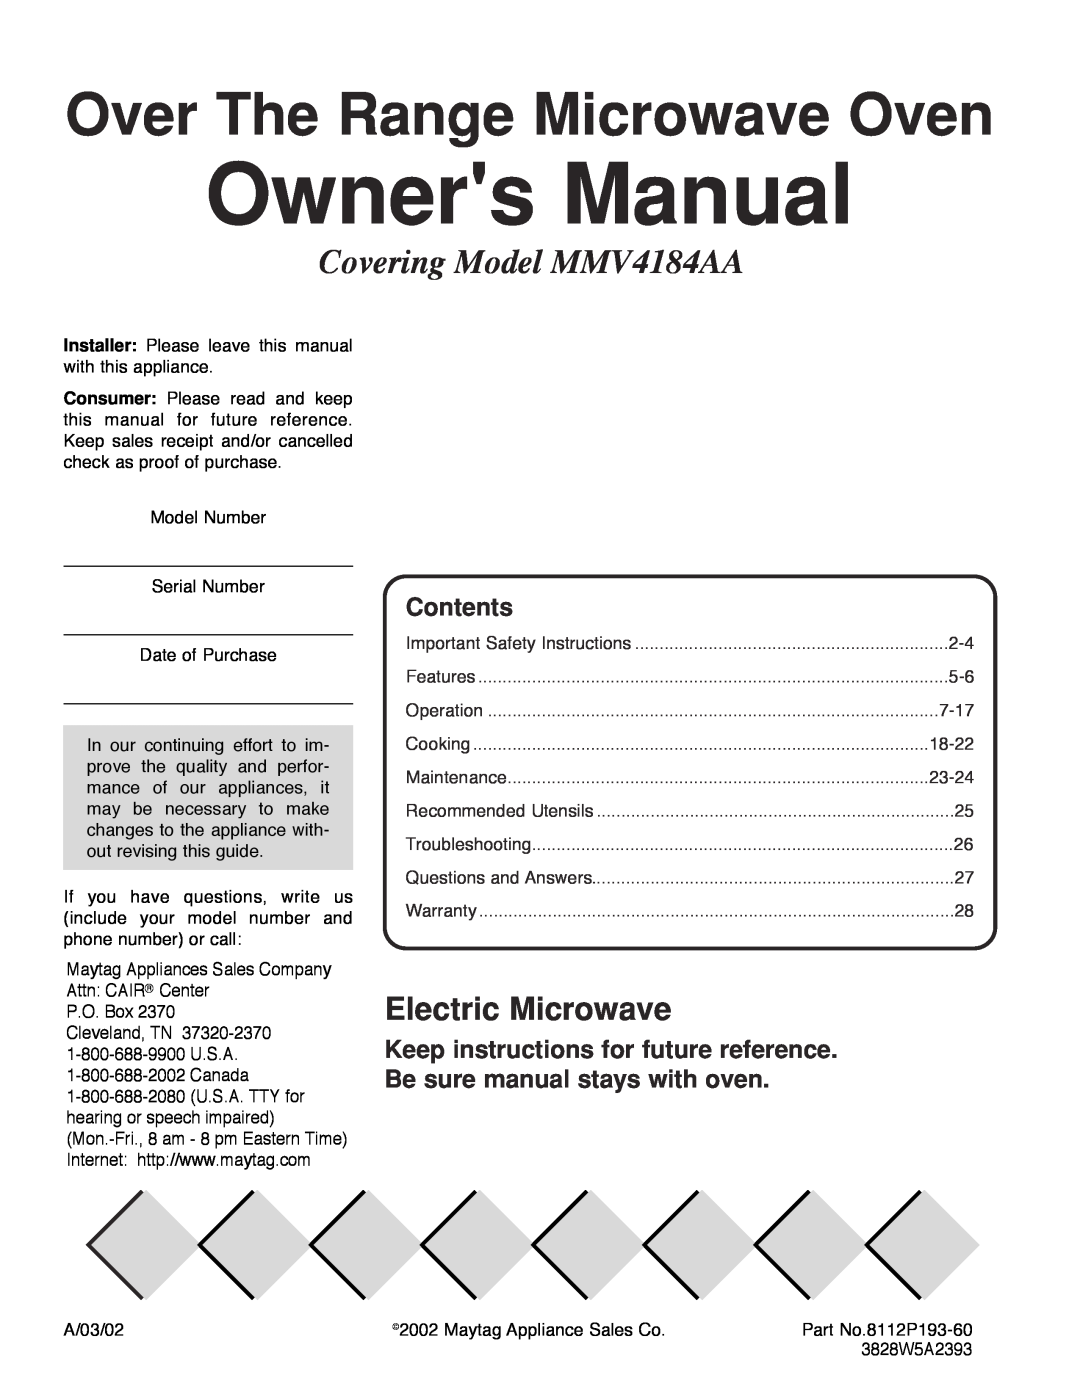 Maytag owner manual Contents, Over The Range Microwave Oven, Covering Model MMV4184AA, Electric Microwave 